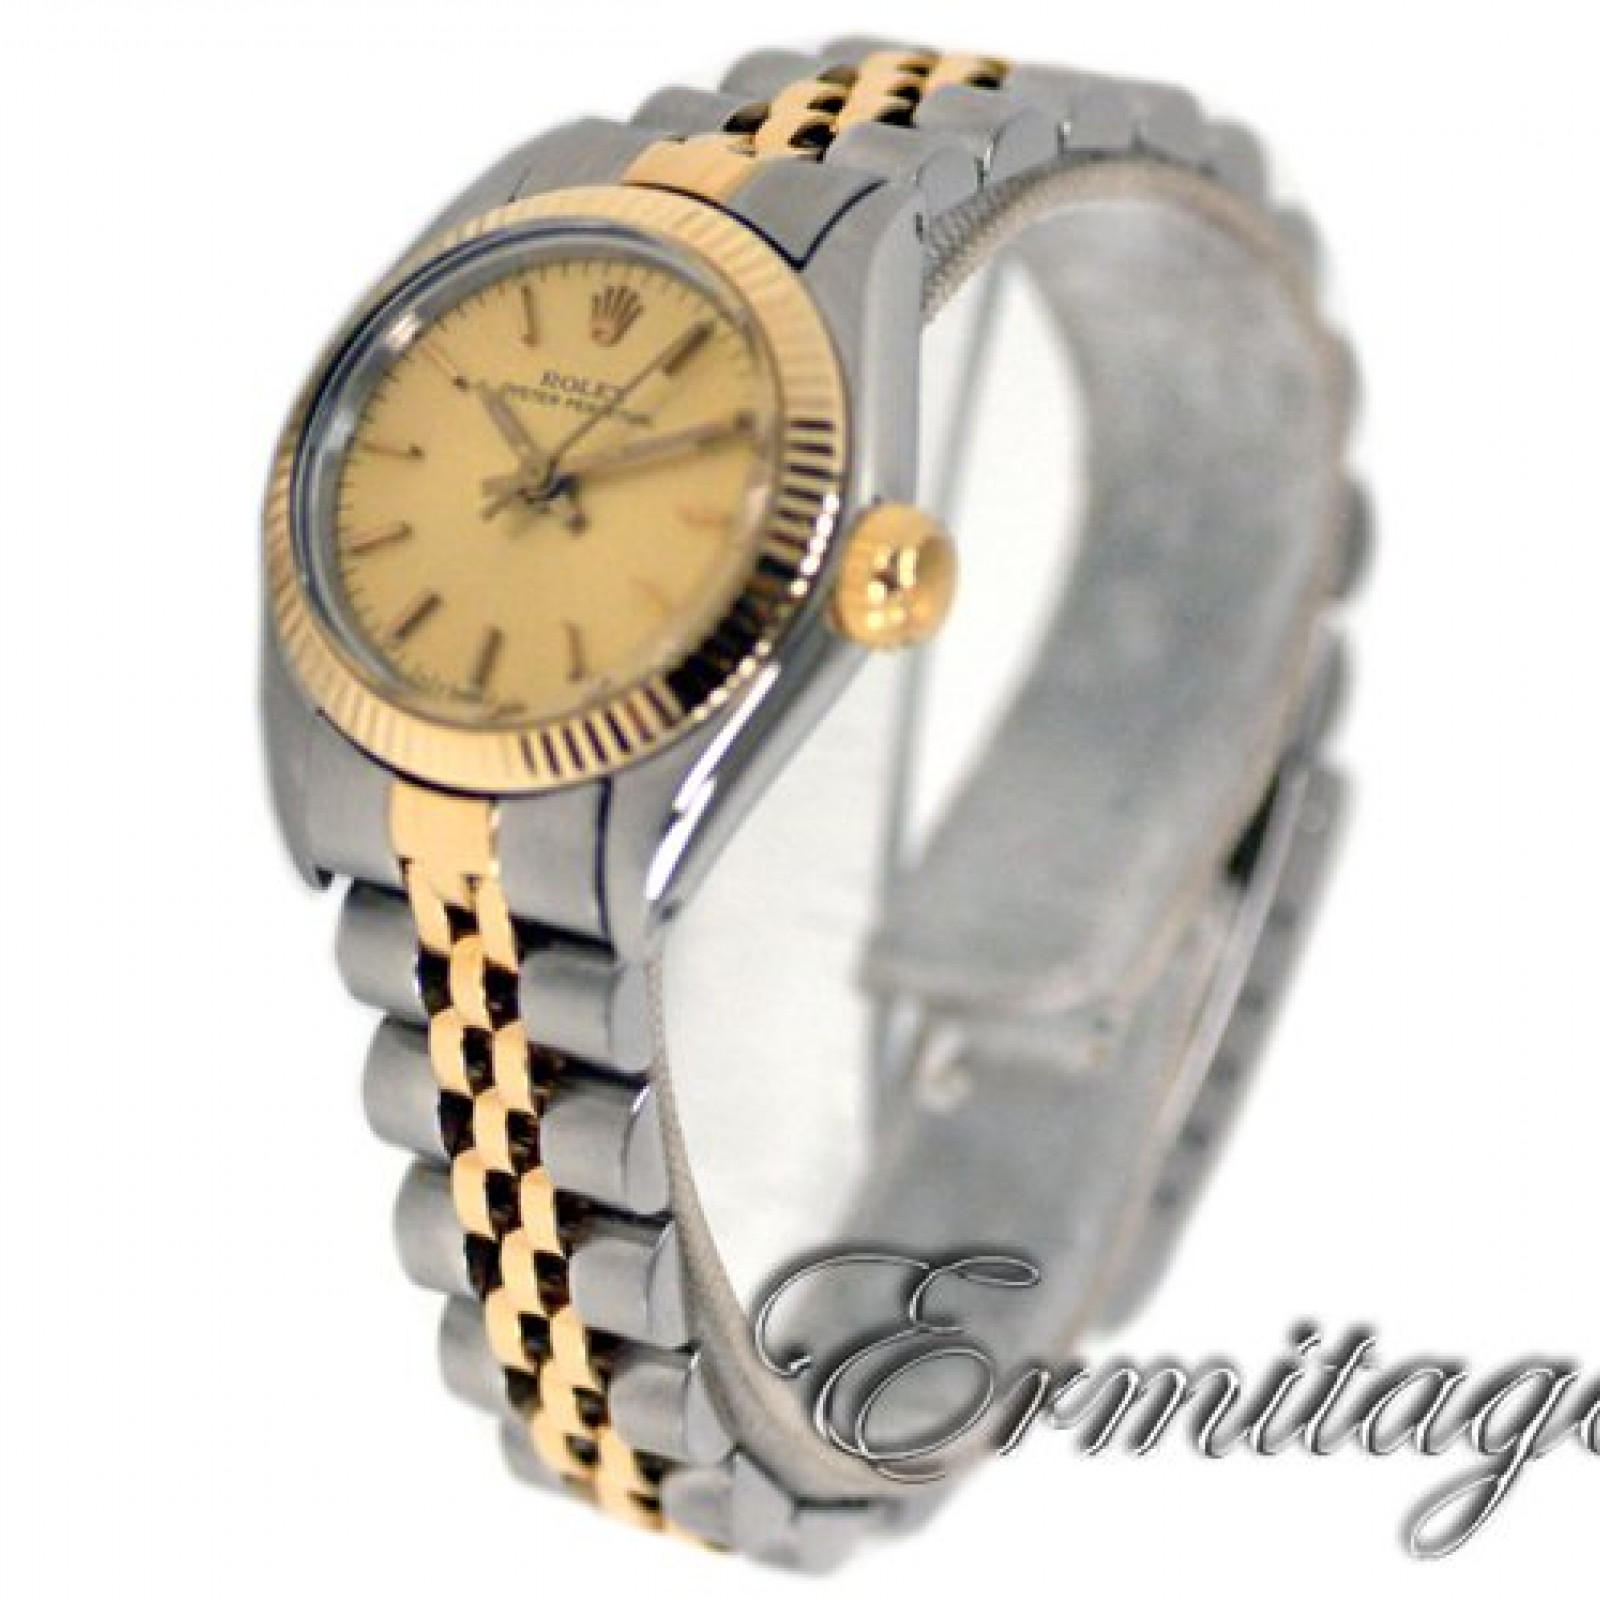 Vintage Rolex Oyster Perpetual 6719 Gold & Steel